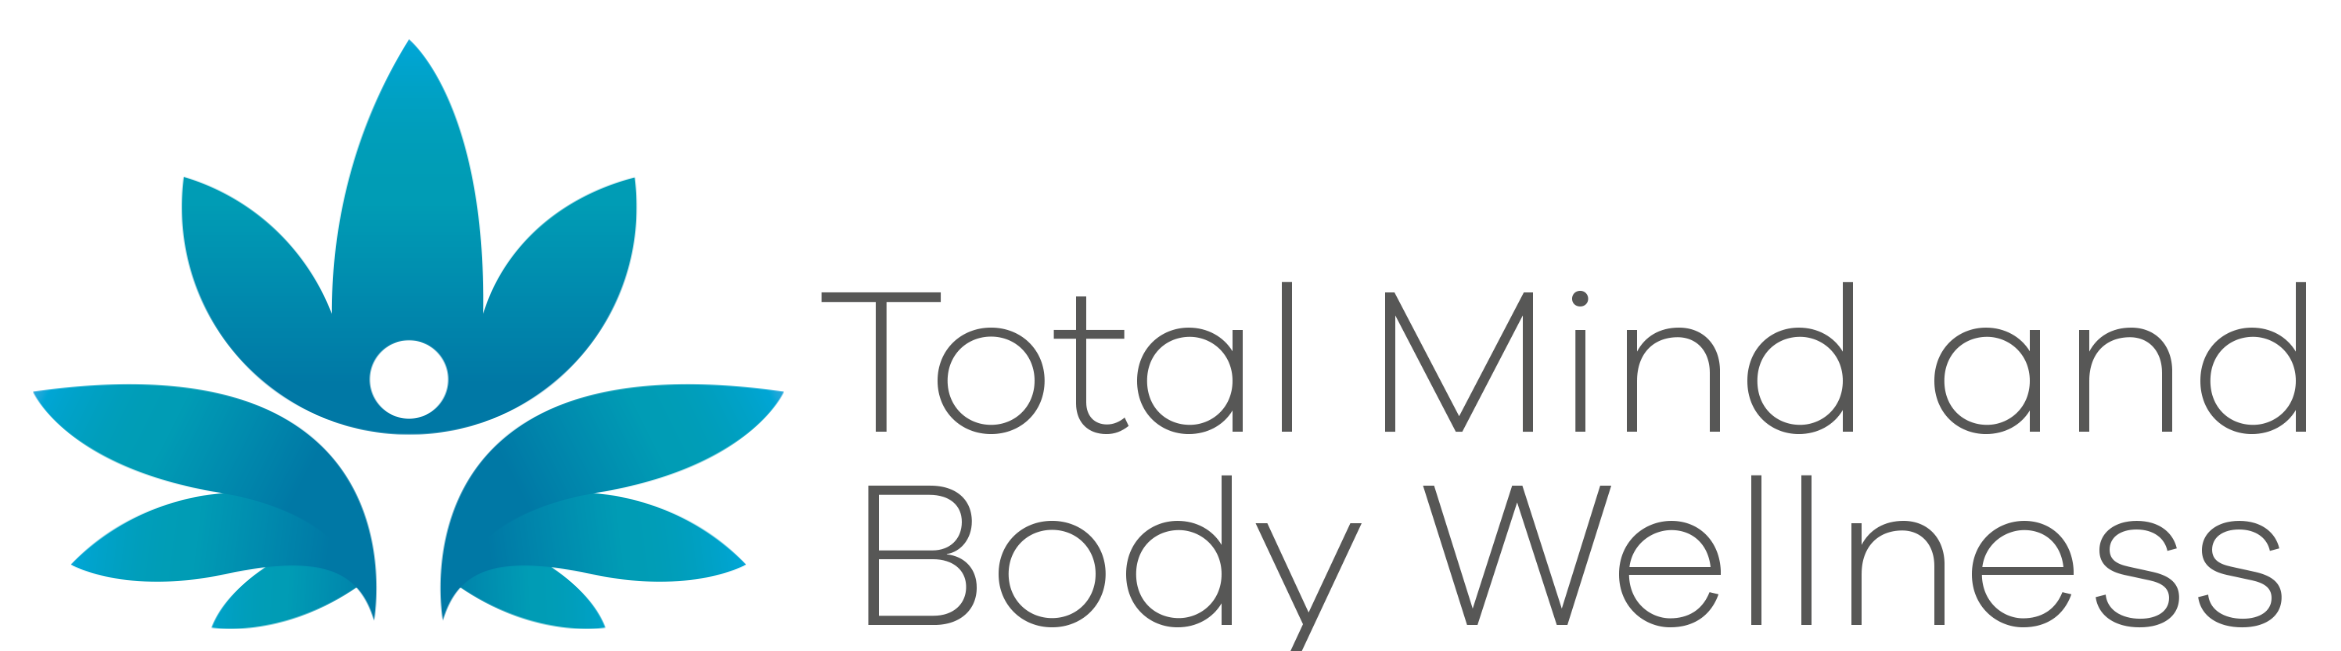 Total Mind and Body Wellness